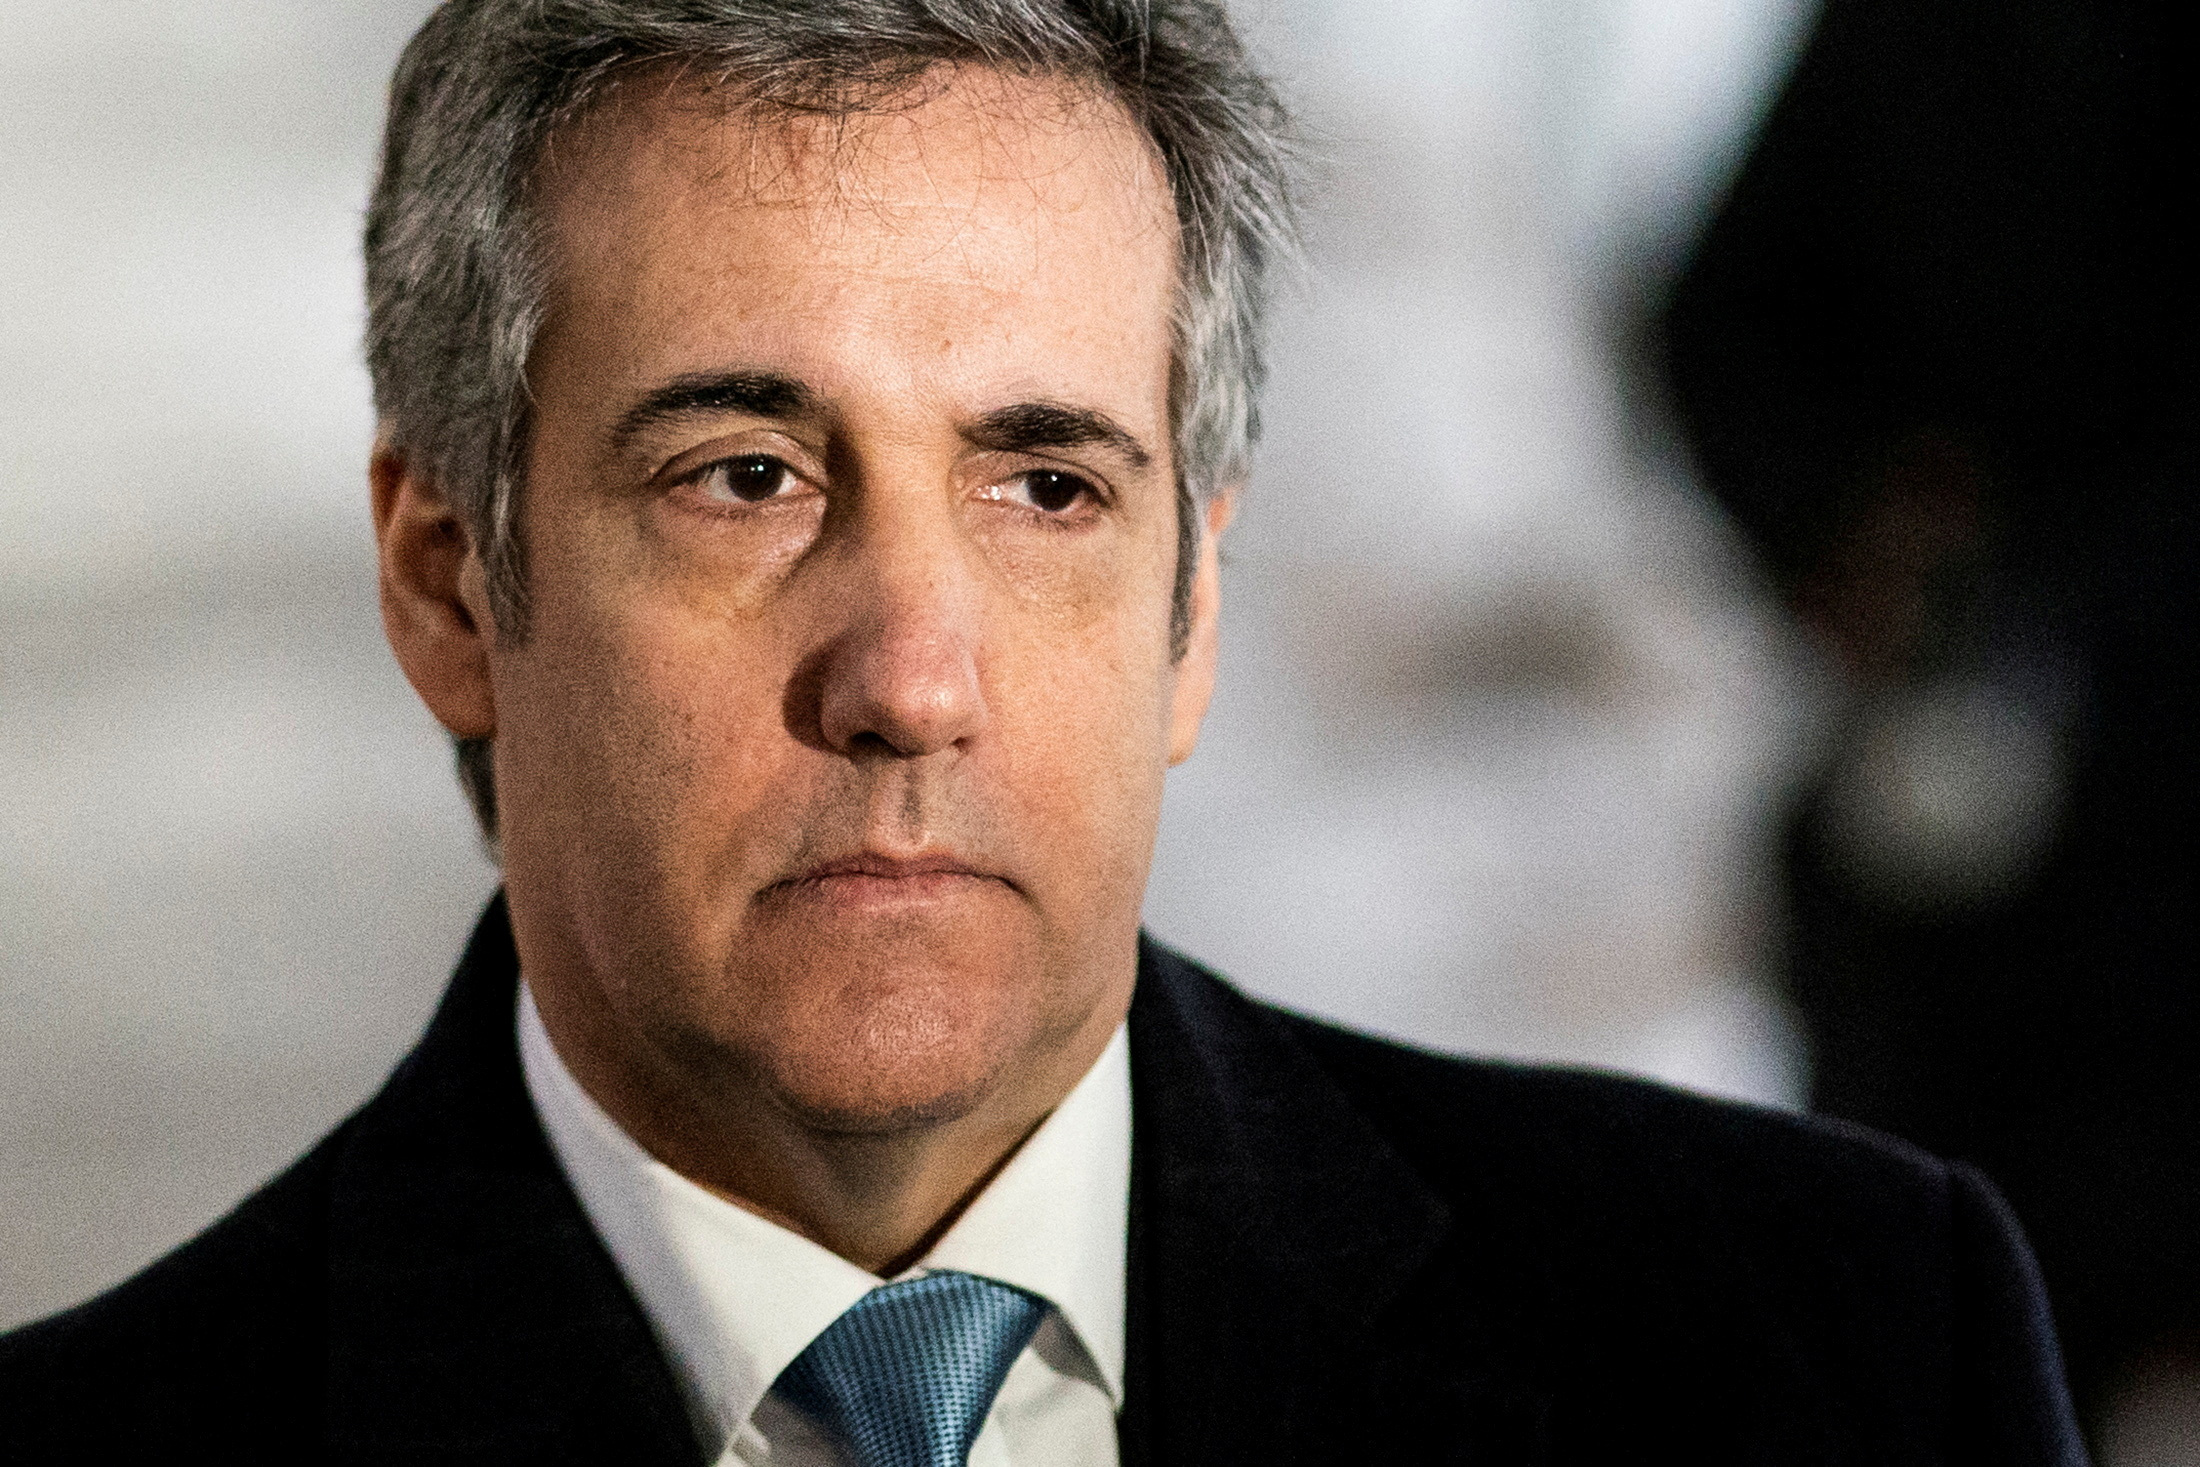 PHOTO: Michael Cohen, former attorney for former U.S. President Donald Trump, arrives to the New York Courthouse in New York City, March 13, 2023.